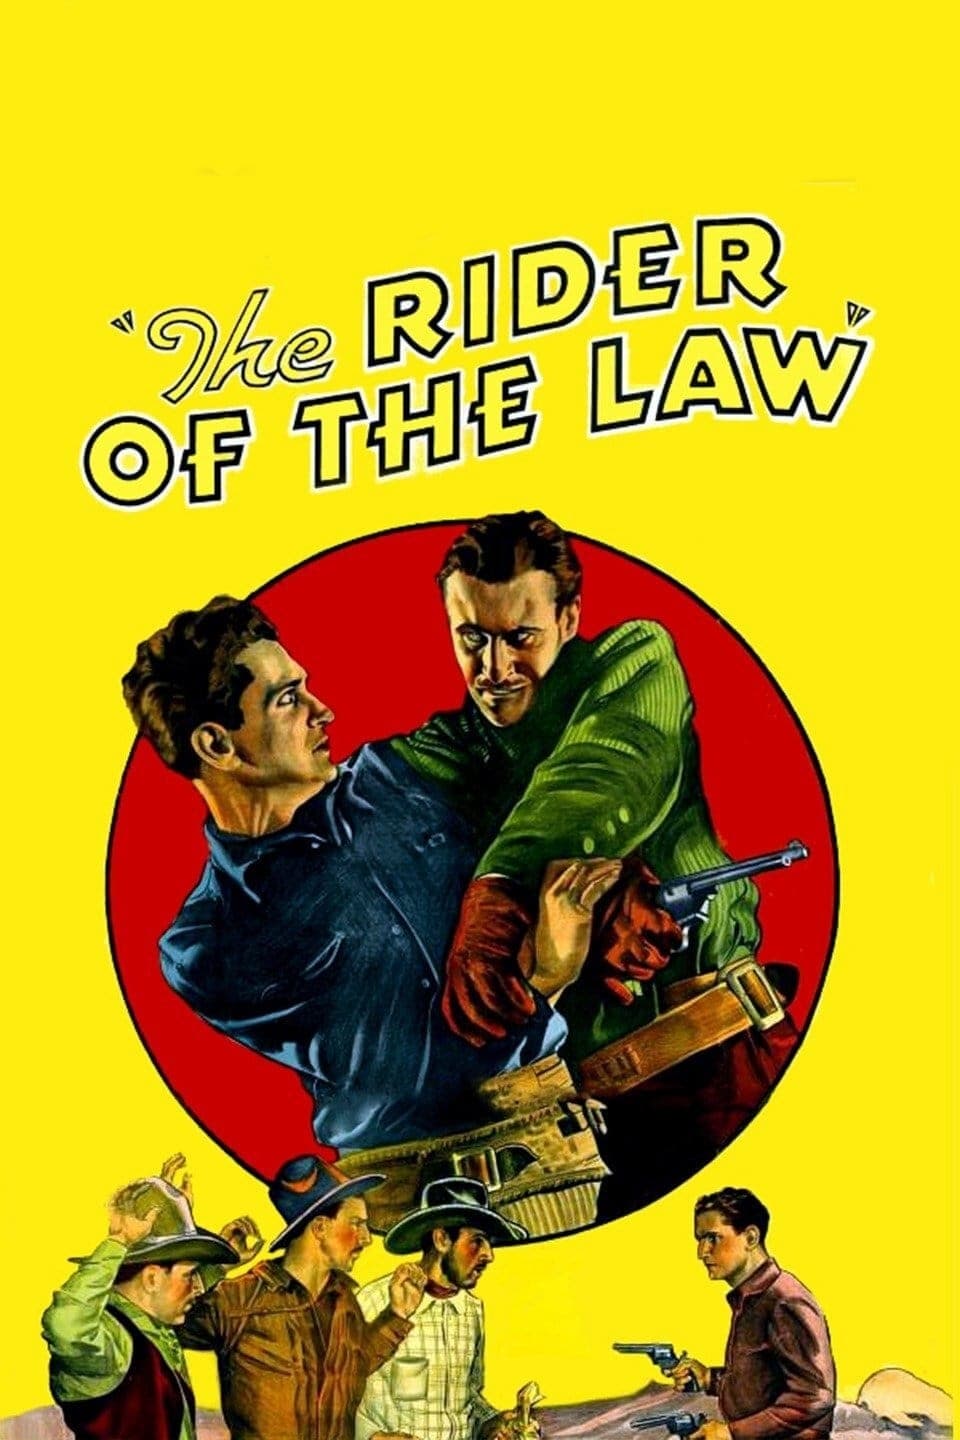 The Rider of the Law